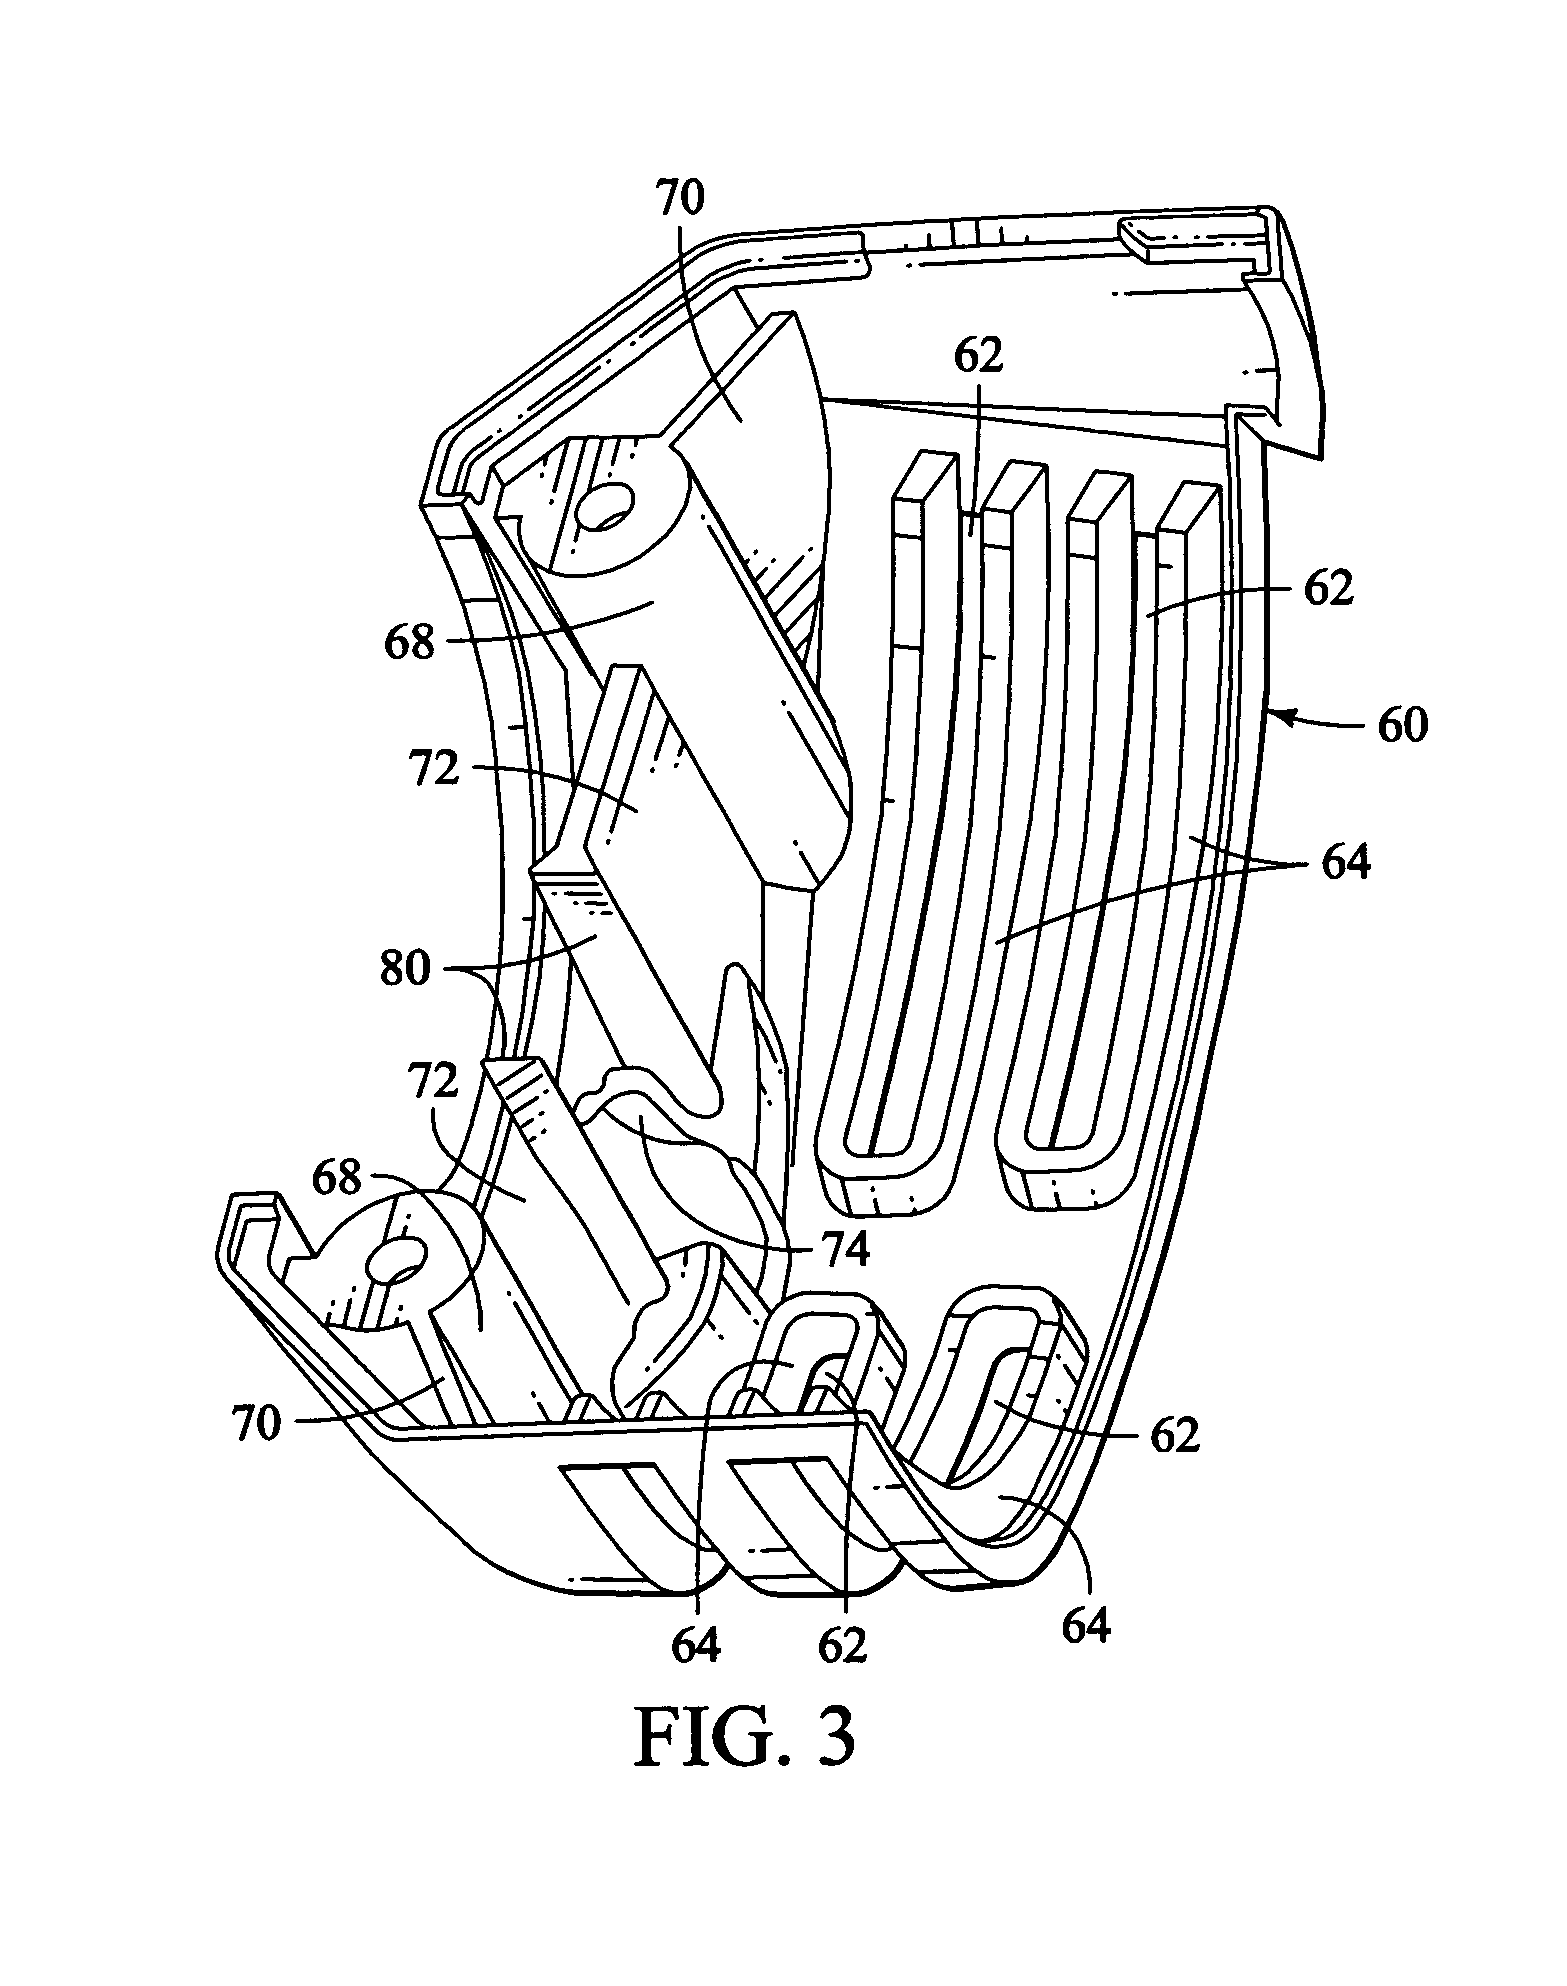 Shaft lock mechanism for a rotary power hand tool